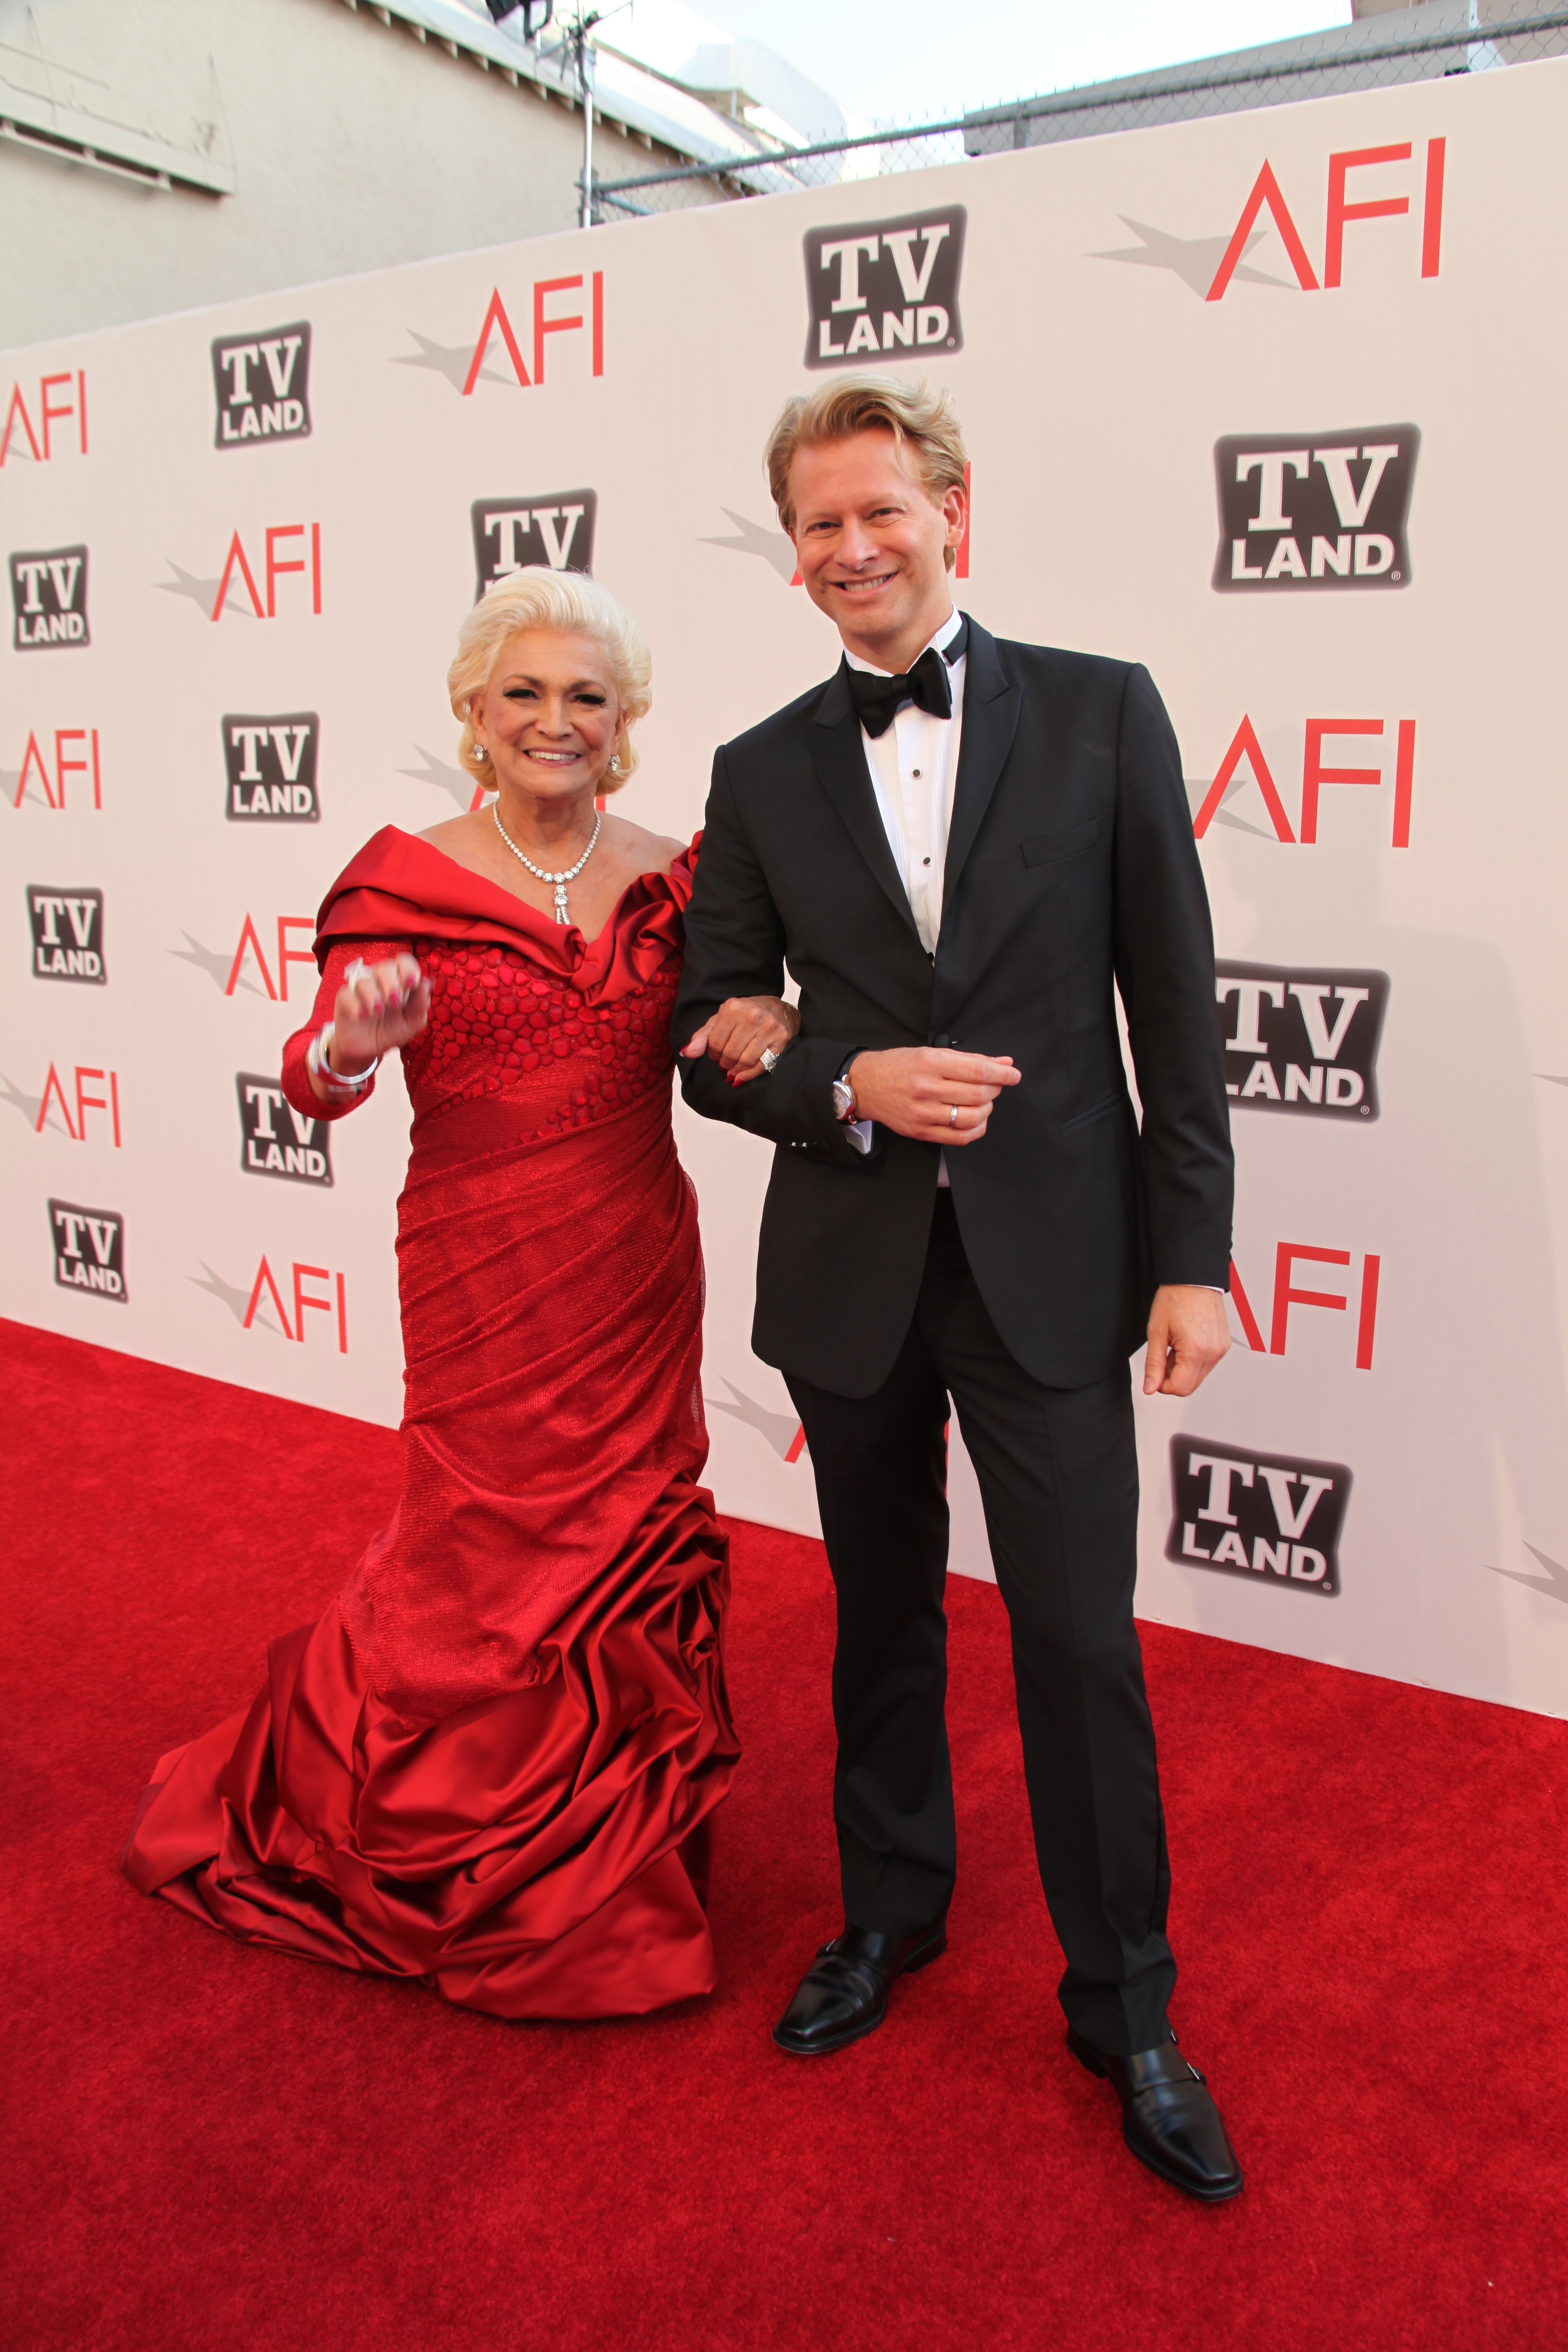 Marcello Coltro and Brazil's TV first lady Hebe Camargo at the 39th AFI Life Achievement Award honoring Morgan Freeman